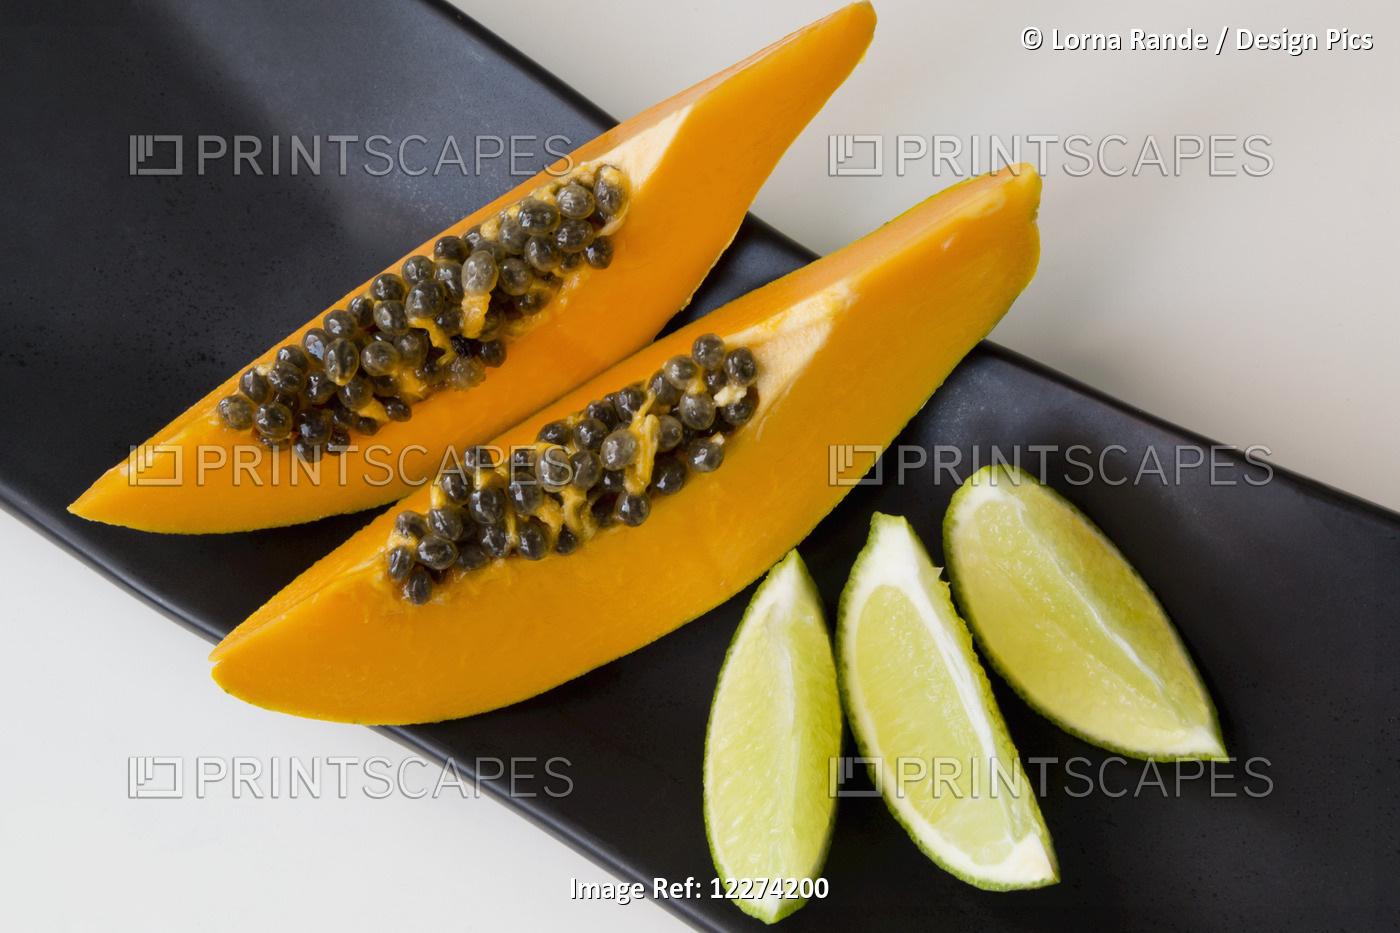 Papaya And Lime Slices On A Black Platter; Chilliwack, British Columbia, Canada